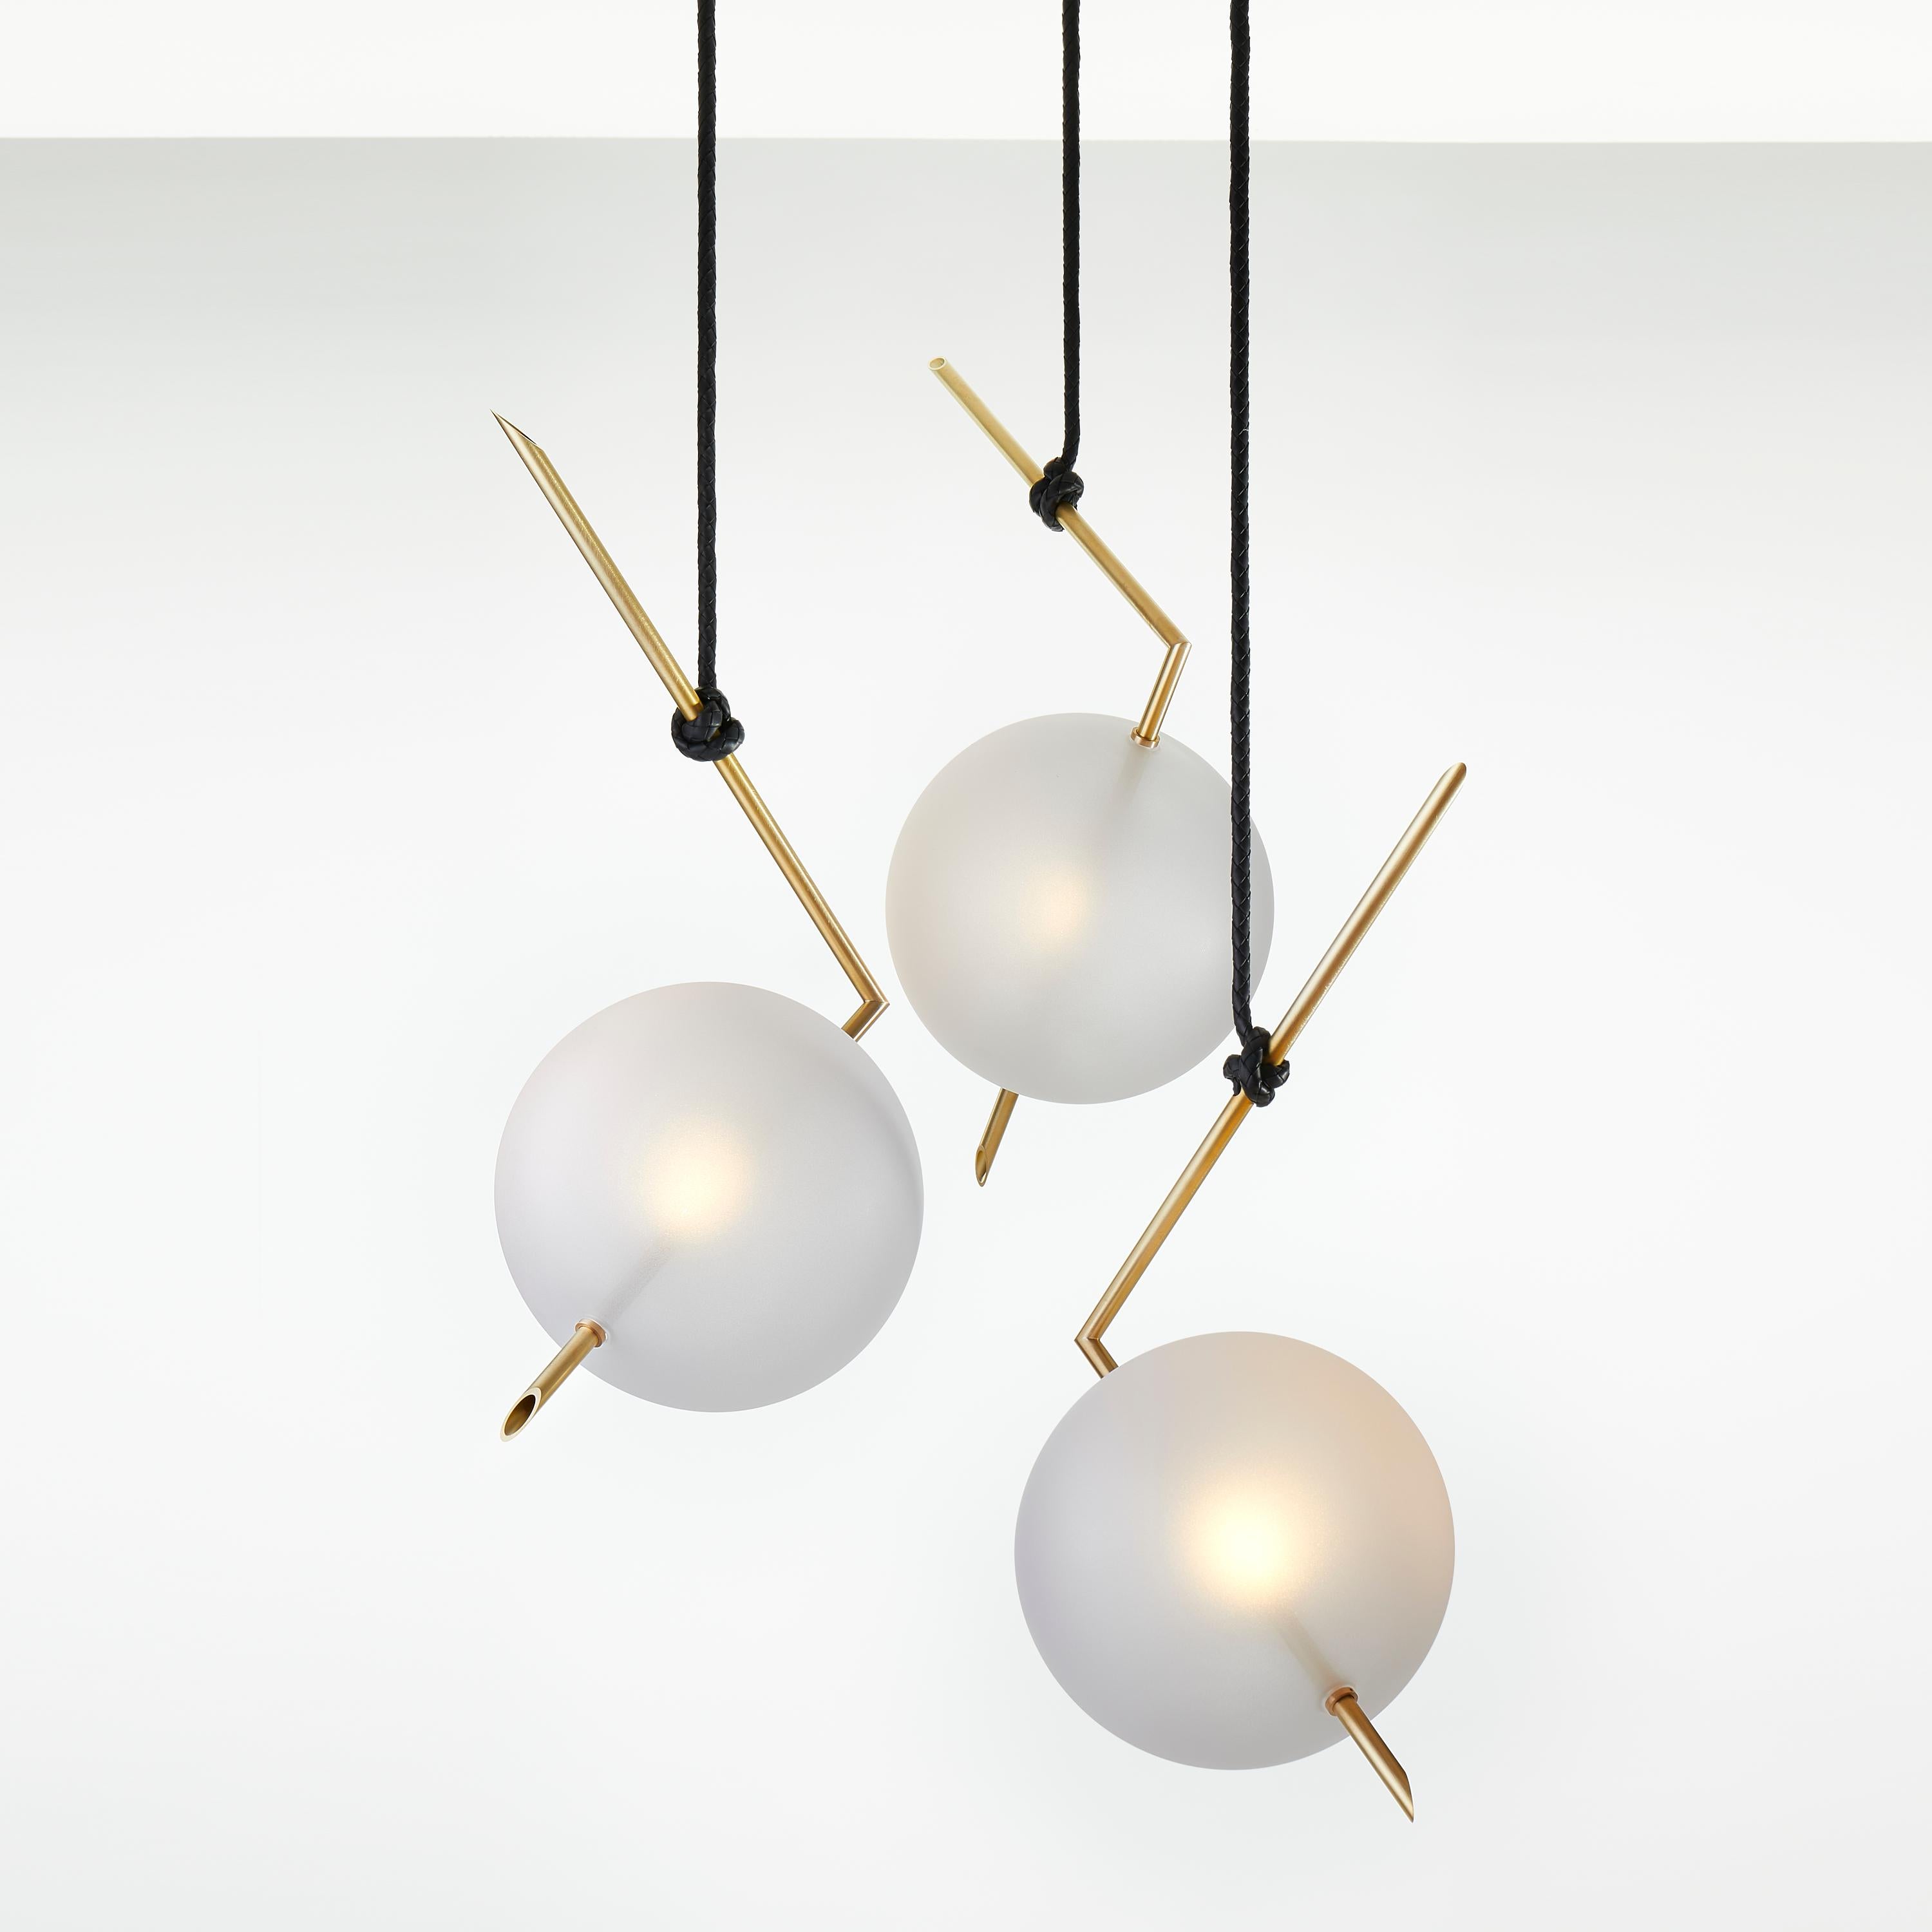 Nuvola Contemporary Pendant light floats in space like a jewel hanging from the ceiling, hooked at the end of a leather cord that has been hand-knotted around the brass tube; a perfect equilibrium of different materials, with obsessive attention to